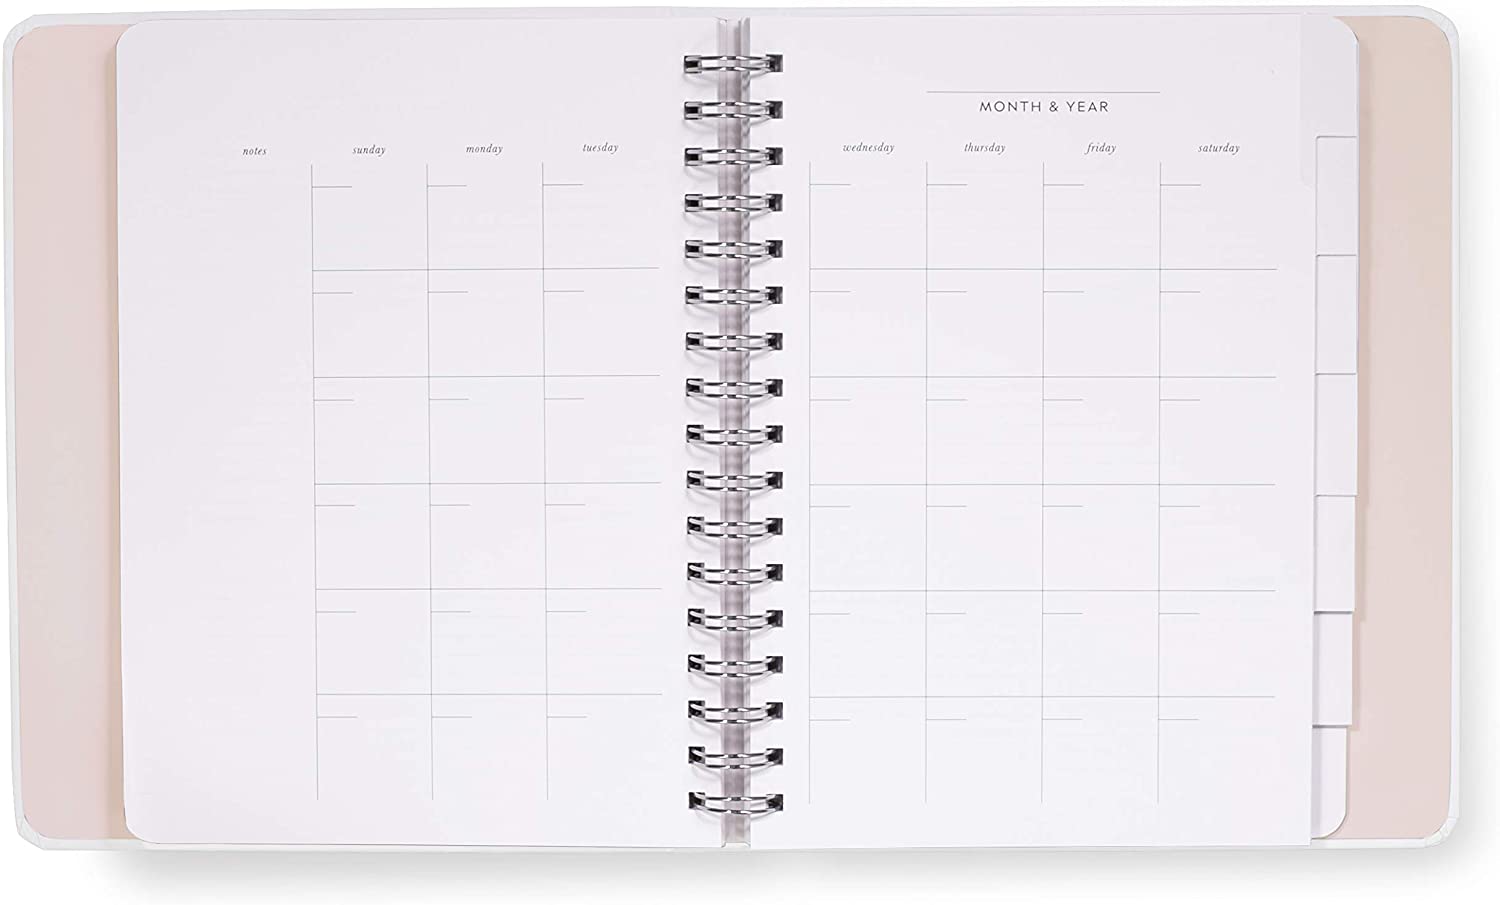 Expecting You, Baby Planner | Kate Spade – Revel